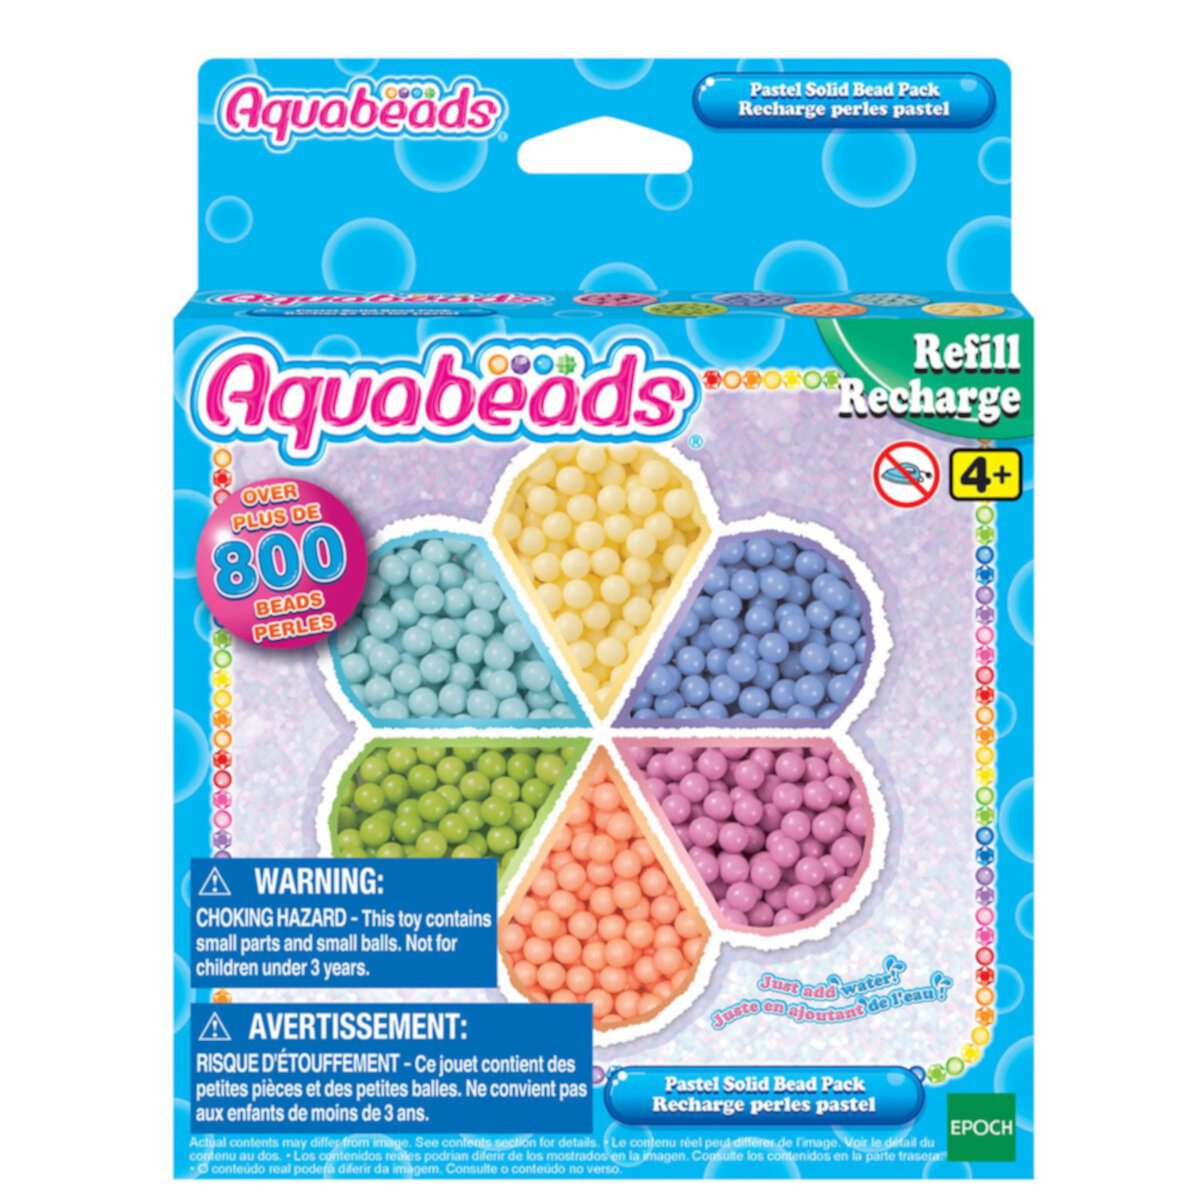 Aquabeads Pastel Solid Bead Pack, Arts & Crafts Bead Refill Kit for Children Aquabeads